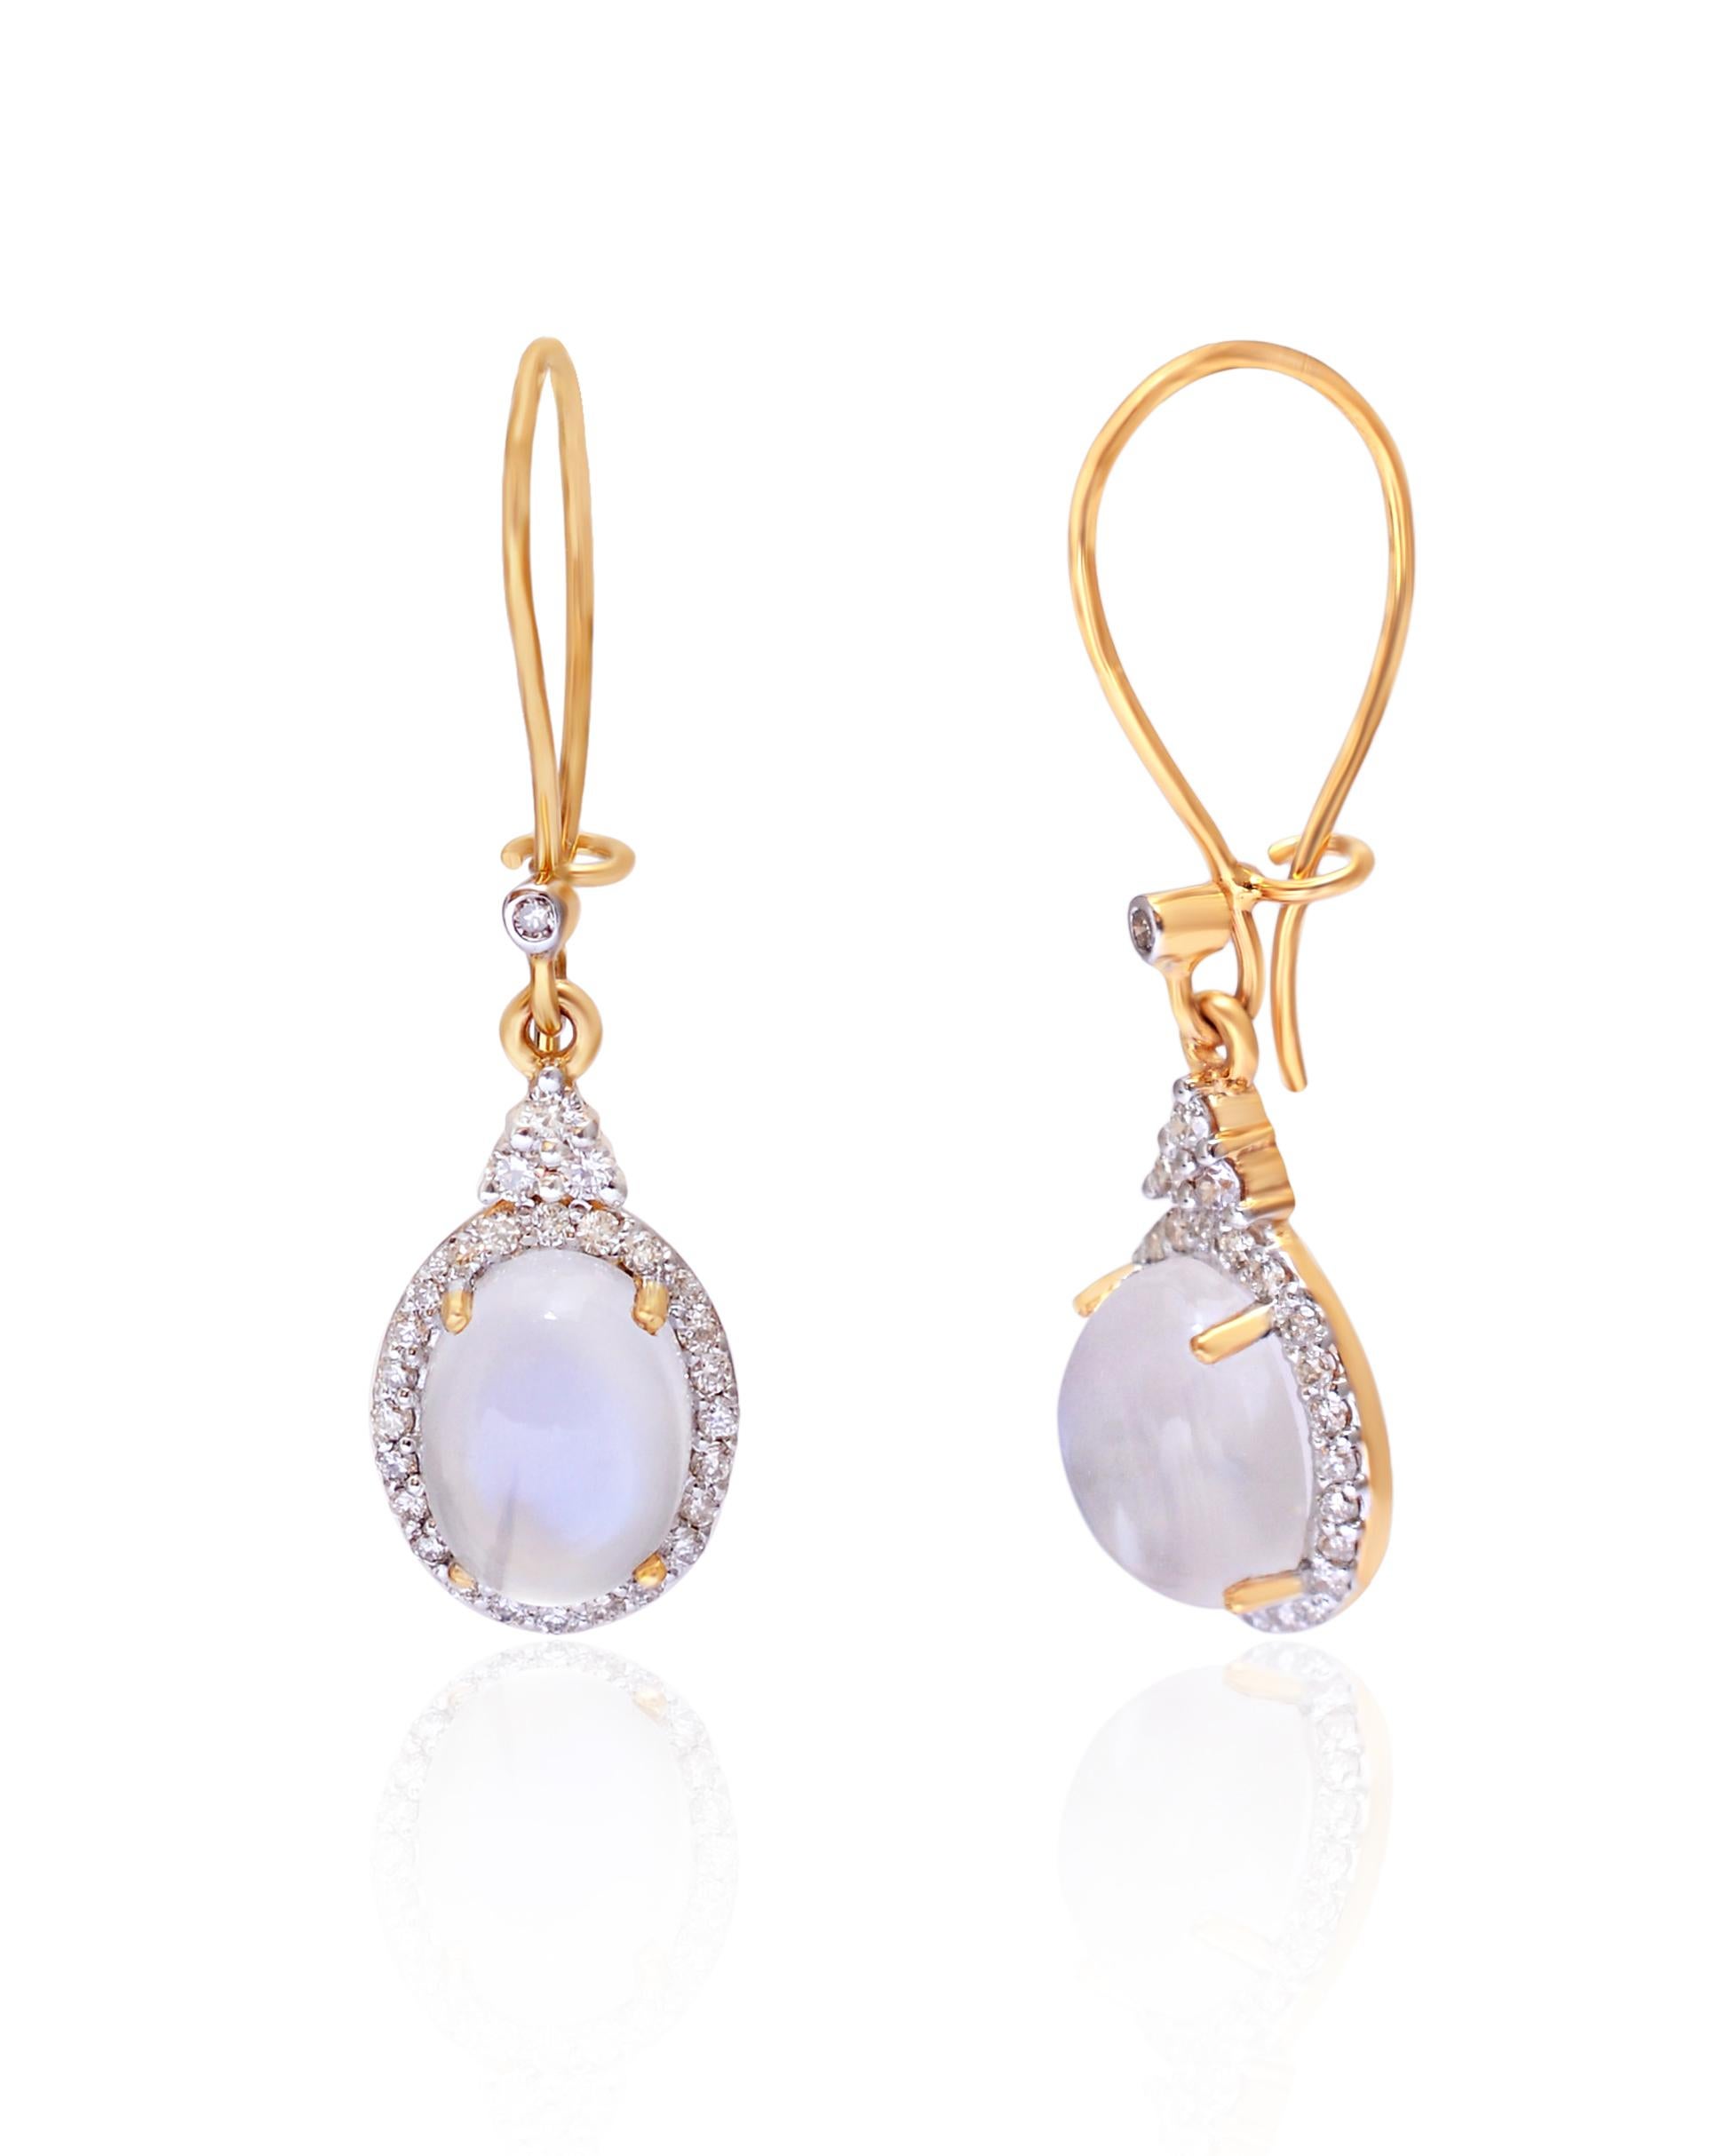 ContemporaryDrop Earrings crafted in 14K Solid Yellow Gold 0.35 Carat Natural Diamond (G-H Color, SI1 SI2 Purity) Opal  Moonstone Gemstone to make your daily wear an affair to remember. 

Specifications

Dimensions: 16*9 MM
Gross Weight: 2.400